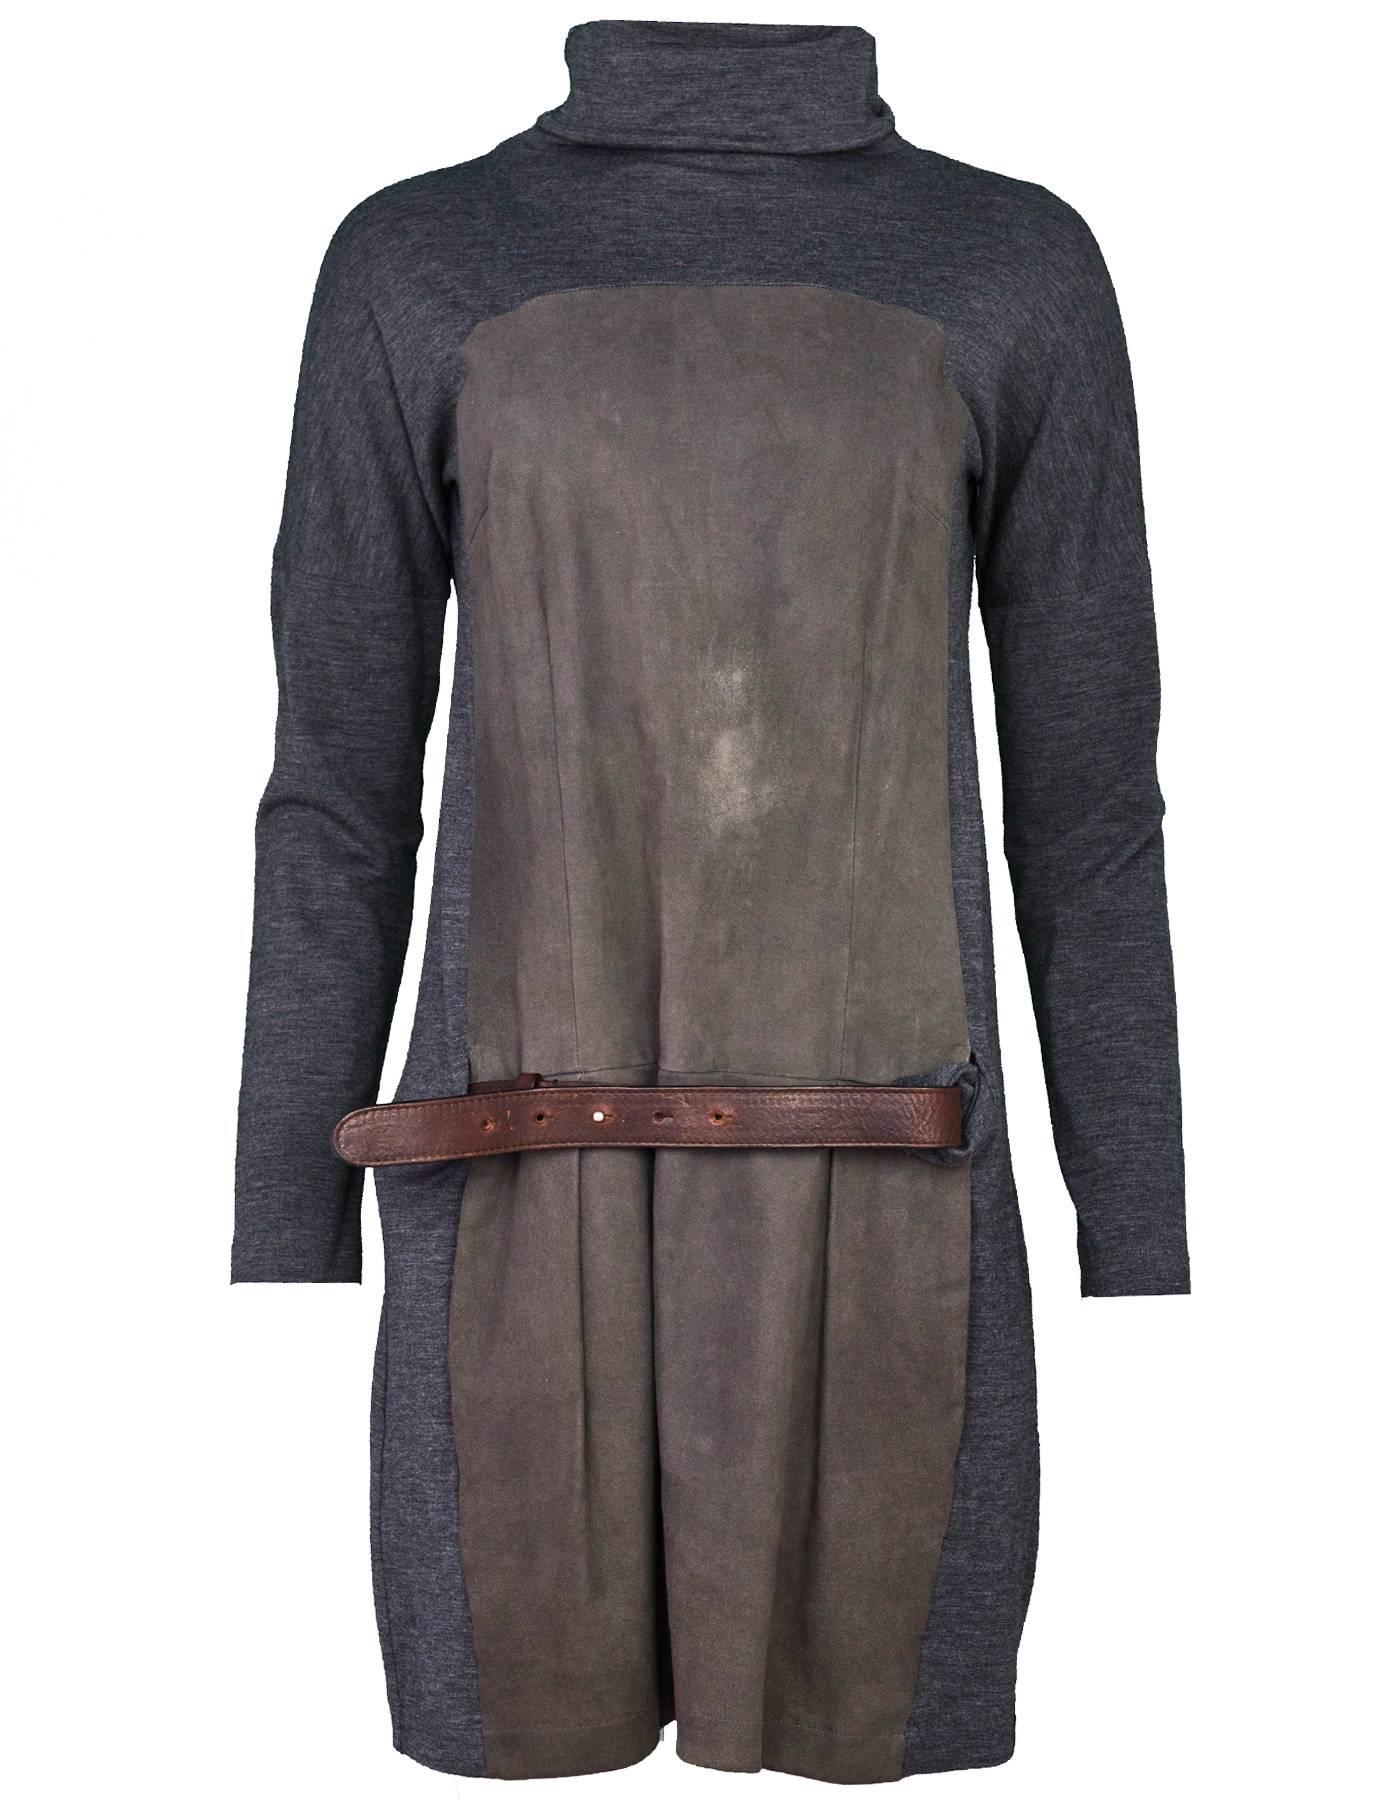 Brunello Cucinelli Grey Wool & Suede Dress Sz L

Color: Grey
Composition: 96% wool, 4% elastan
Lining: None
Closure/Opening: Pull-over
Overall Condition: Very good pre-owned condition with the exception of wear at front suede and at belt
Marked